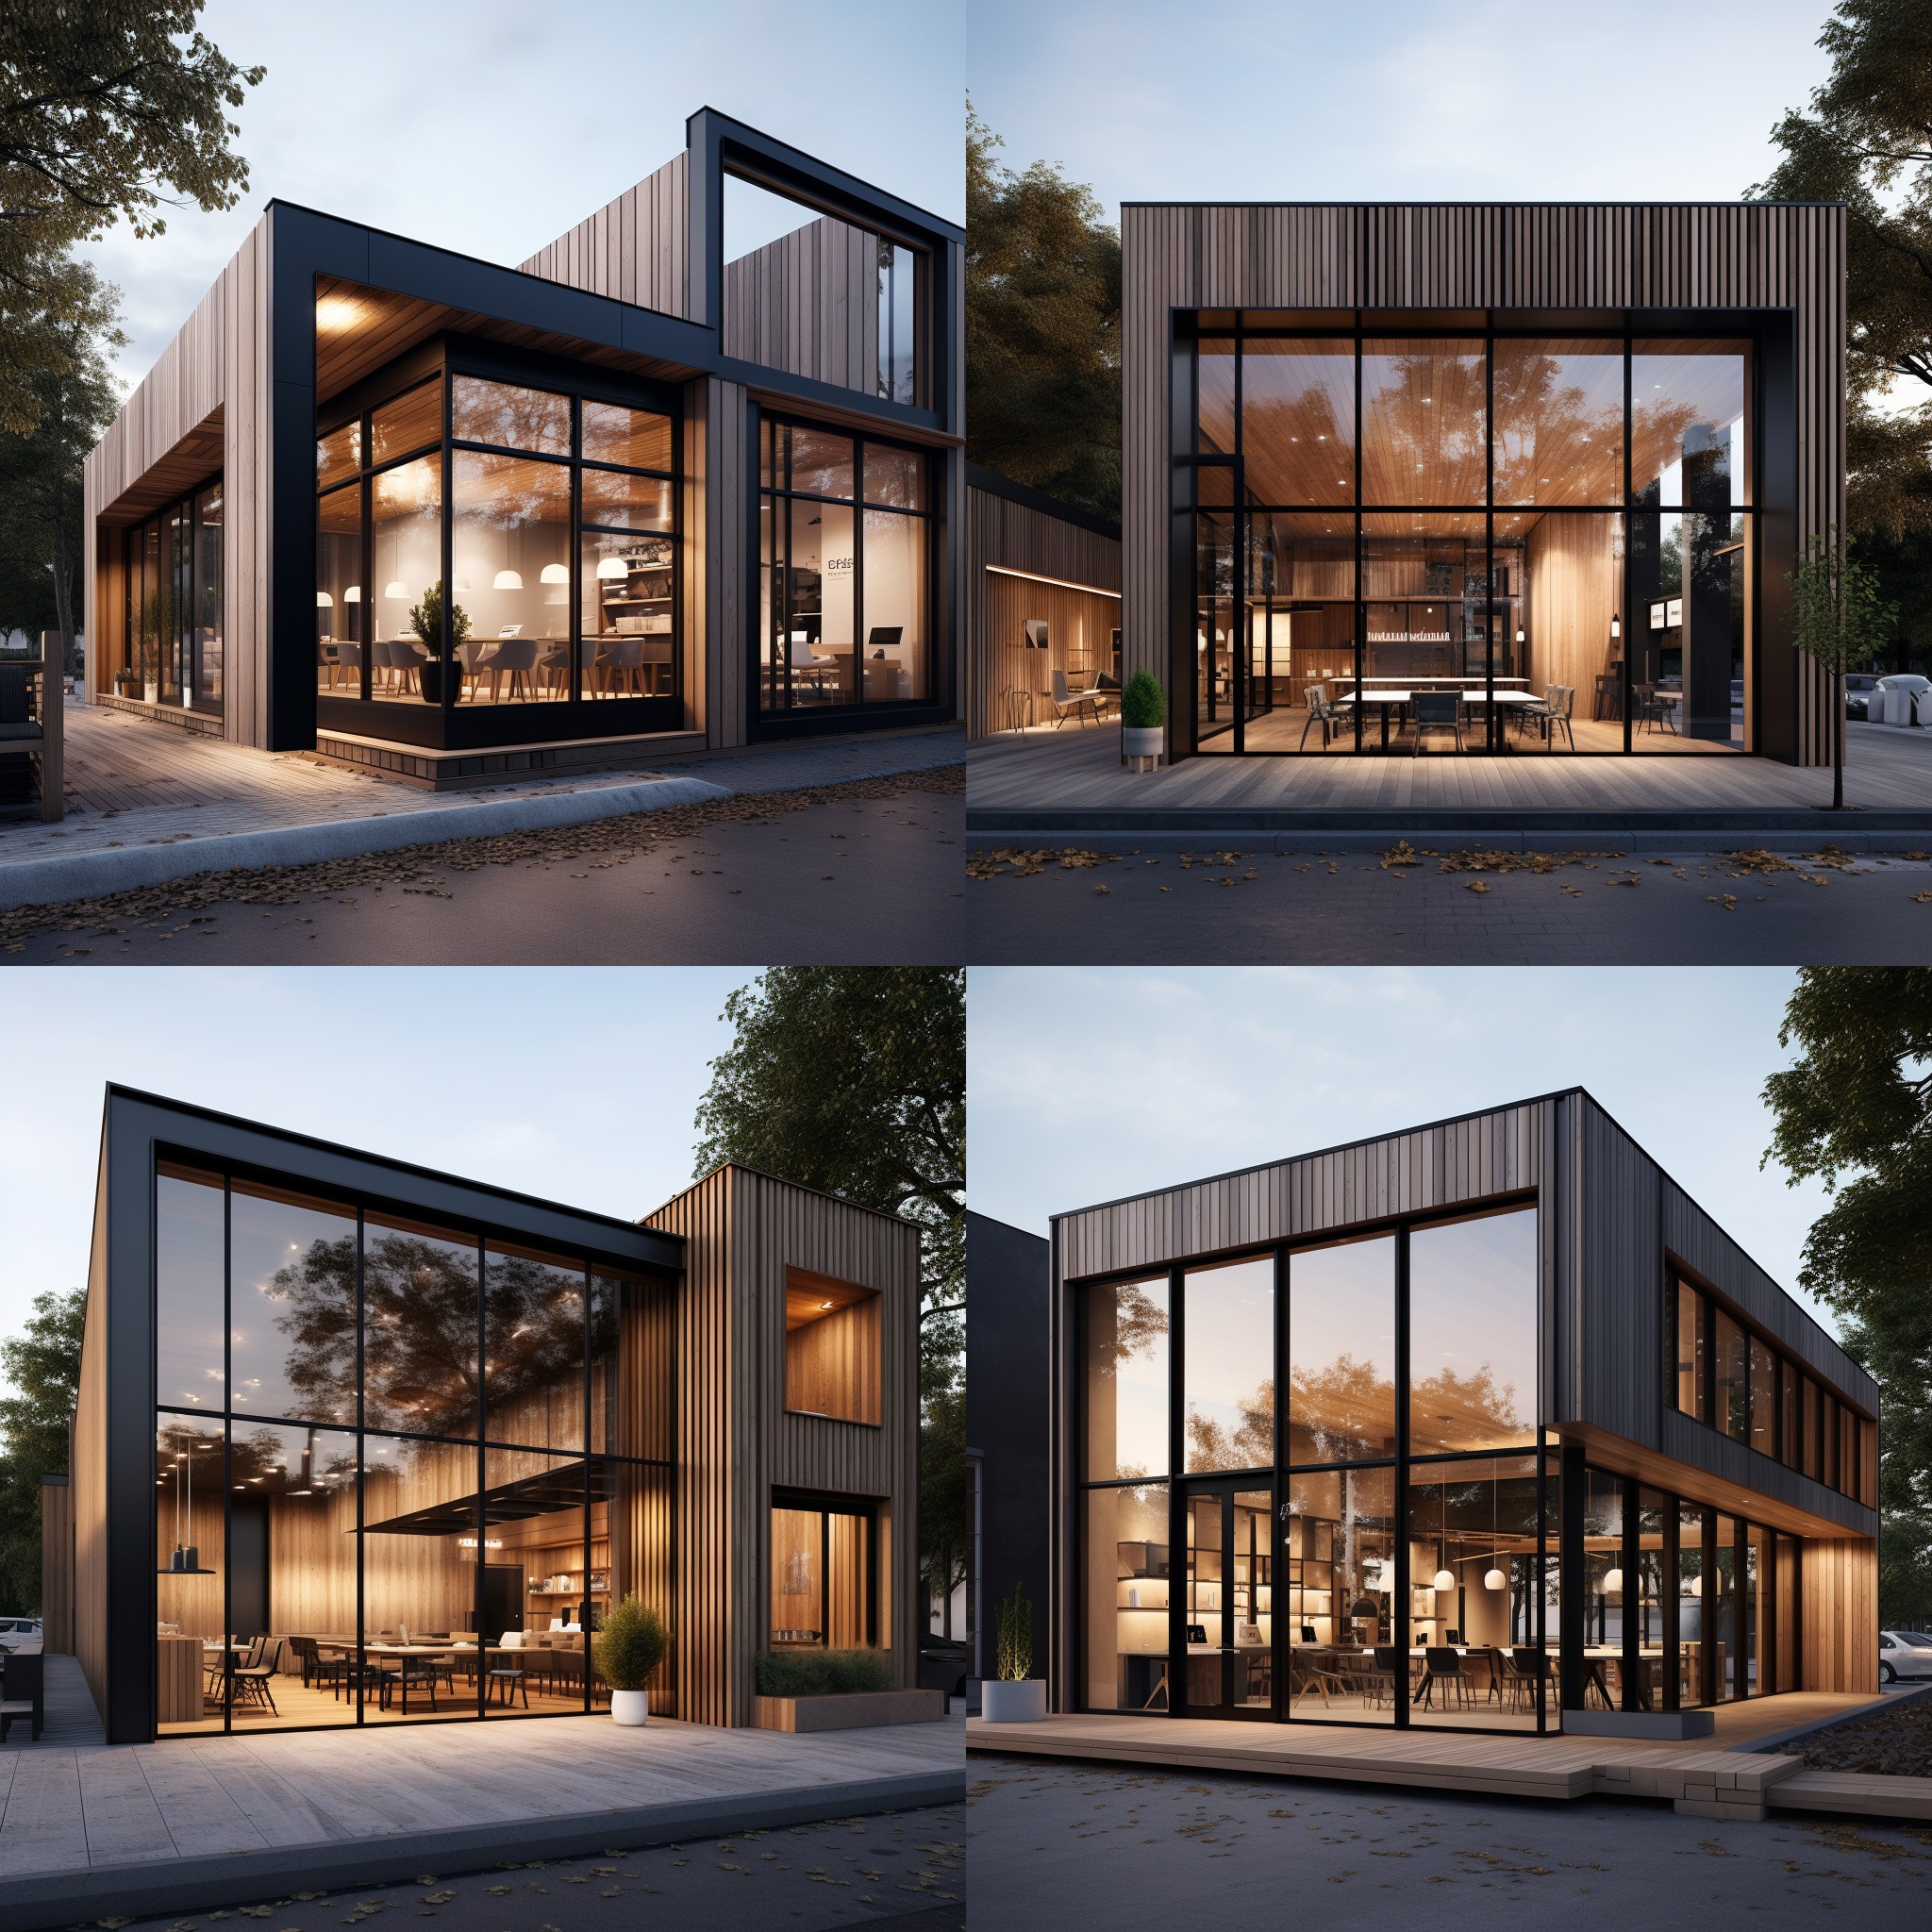 ryan_rankin_art_a_modern_wood_and_steel_office_and_retail_store_c3f31ae1-11c5-4983-be31-136ce29d4404